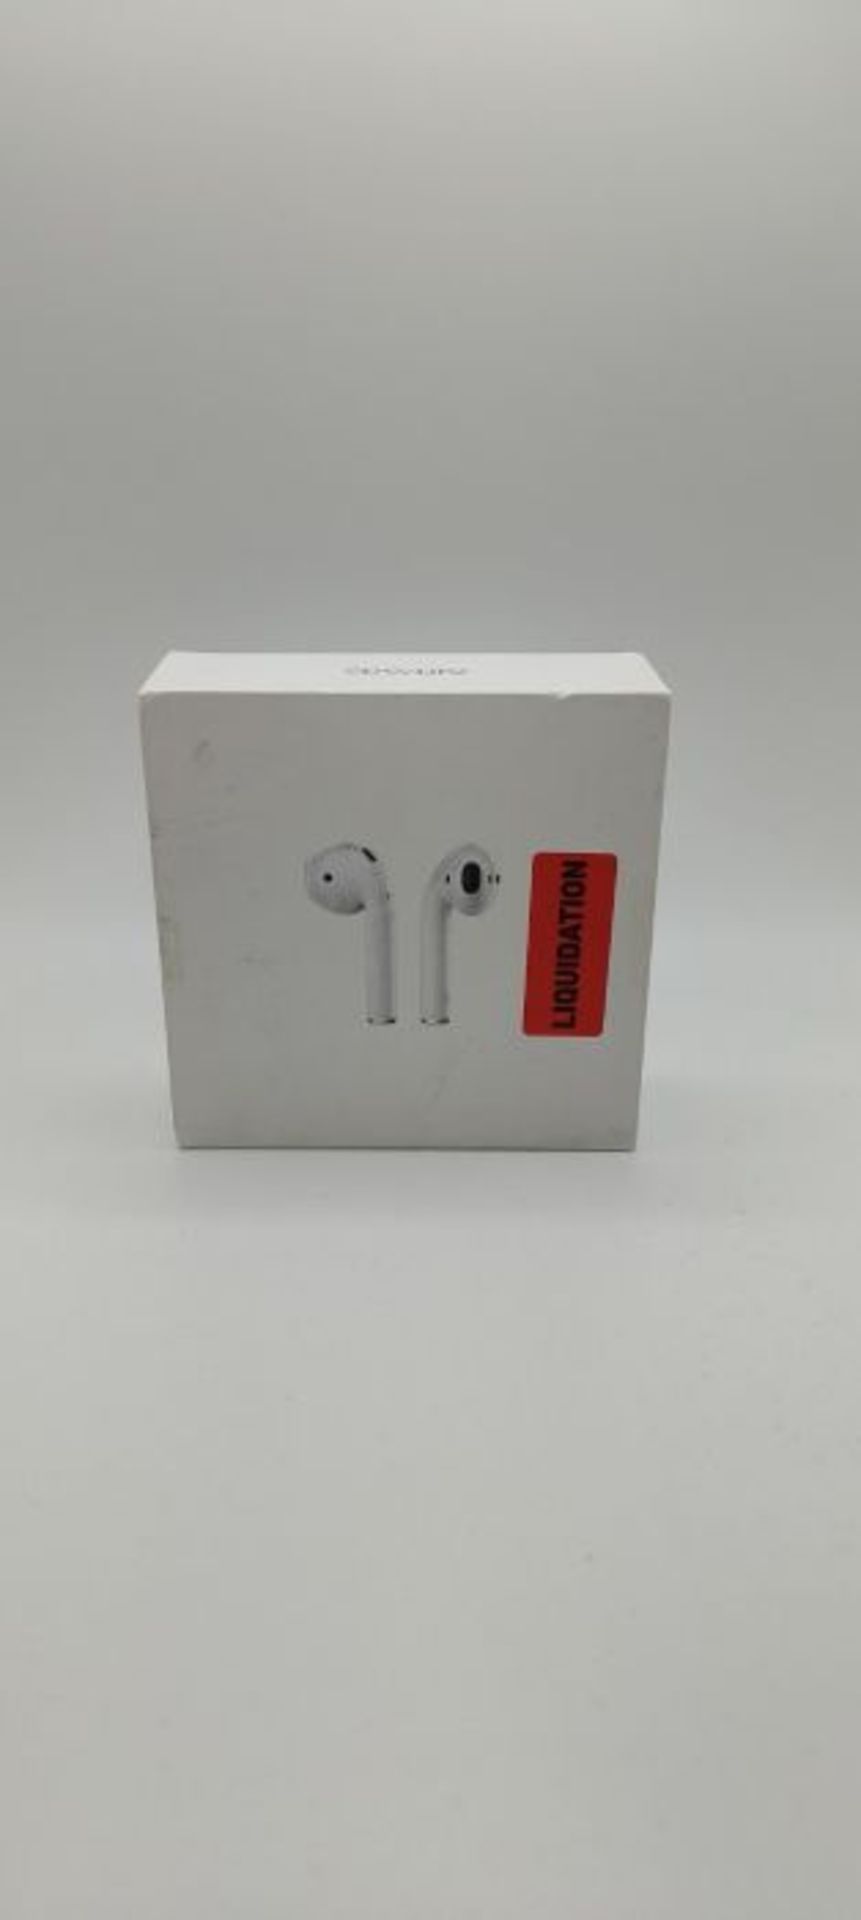 RRP £129.00 Apple AirPods avec bo?tier de Charge Filaire (2? g?n?ration) - Image 2 of 3